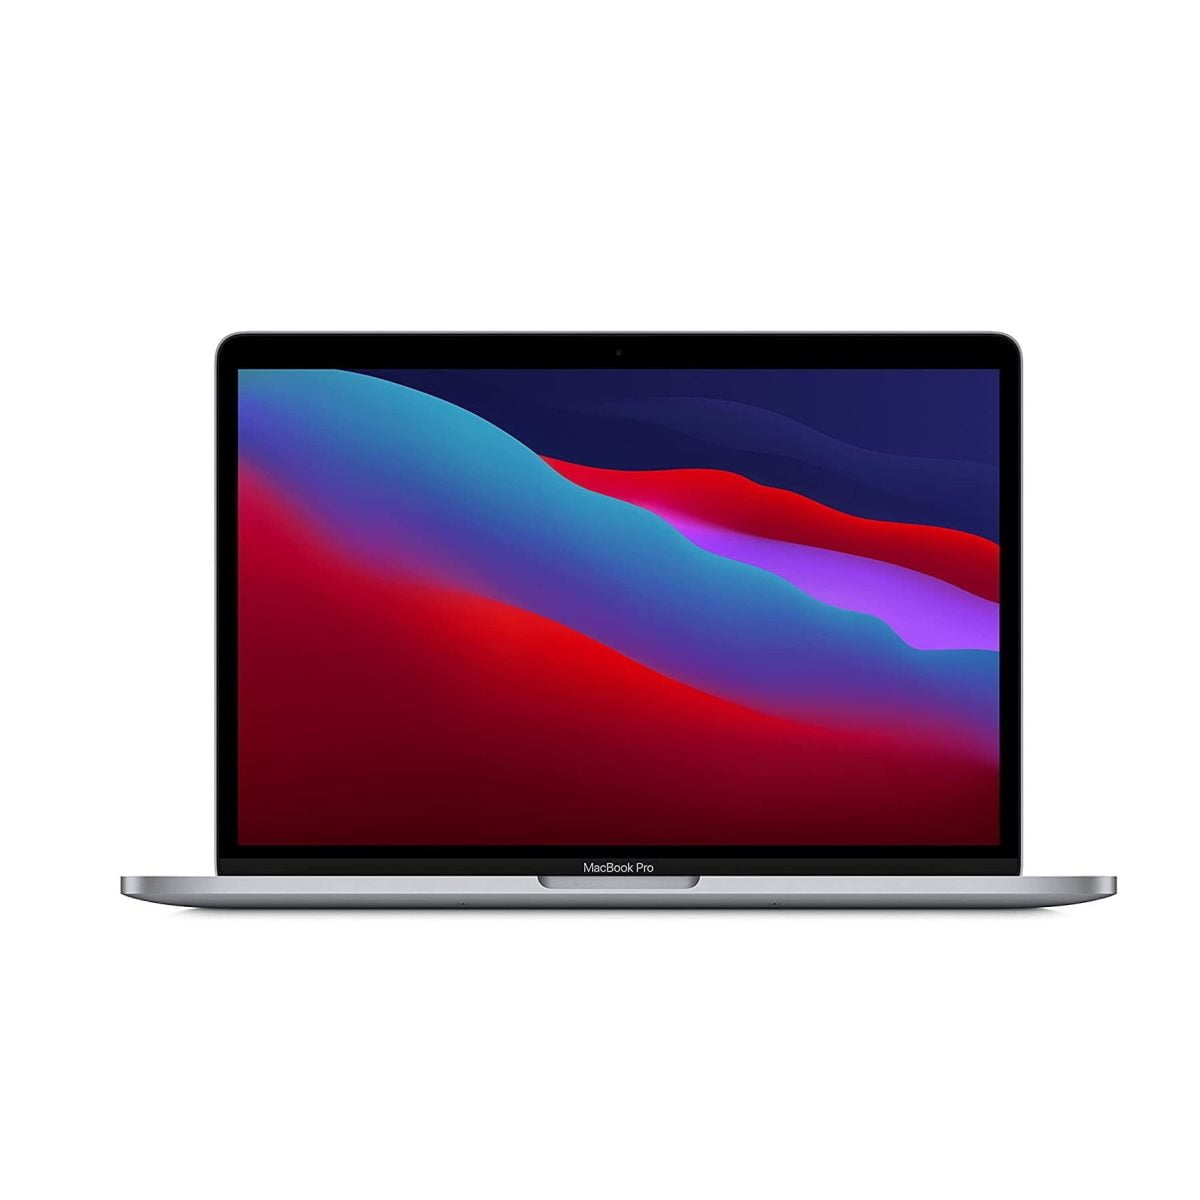 61Y5Nbpaxls. Ac Sl1500 Apple &Lt;H1 Class=&Quot;A-Size-Large A-Spacing-None&Quot;&Gt;Apple Macbook Pro 13.3&Quot; Laptop - Apple M1 Chip - 8Gb Memory - 512Gb Ssd (Latest Model) - Space Gray &Lt;Span Id=&Quot;Producttitle&Quot; Class=&Quot;A-Size-Large Product-Title-Word-Break&Quot;&Gt;(English Keyboard)&Lt;/Span&Gt;&Lt;/H1&Gt; &Lt;P Class=&Quot;Heading-5 V-Fw-Regular Description-Heading&Quot;&Gt;&Lt;Span Style=&Quot;Color: #333333; Font-Size: 16Px;&Quot;&Gt;The Apple M1 Chip Redefines The 13-Inch Macbook Pro. Featuring An 8-Core Cpu That Flies Through Complex Workflows In Photography, Coding, Video Editing, And More. Incredible 8-Core Gpu That Crushes Graphics-Intensive Tasks And Enables Super-Smooth Gaming. An Advanced 16-Core Neural Engine For More Machine Learning Power In Your Favorite Apps. Superfast Unified Memory For Fluid Performance. And The Longest-Ever Battery Life In A Mac At Up To 20 Hours.² It’s Apple'S Most Popular Pro Notebook. Way More Performance And Way More Pro.&Lt;/Span&Gt;&Lt;/P&Gt; Mac Book Pro 2020 Apple Macbook Pro 13.3&Quot; Laptop - Apple M1 Chip - 8Gb Memory - 512Gb Ssd (Myd92) - Space Gray